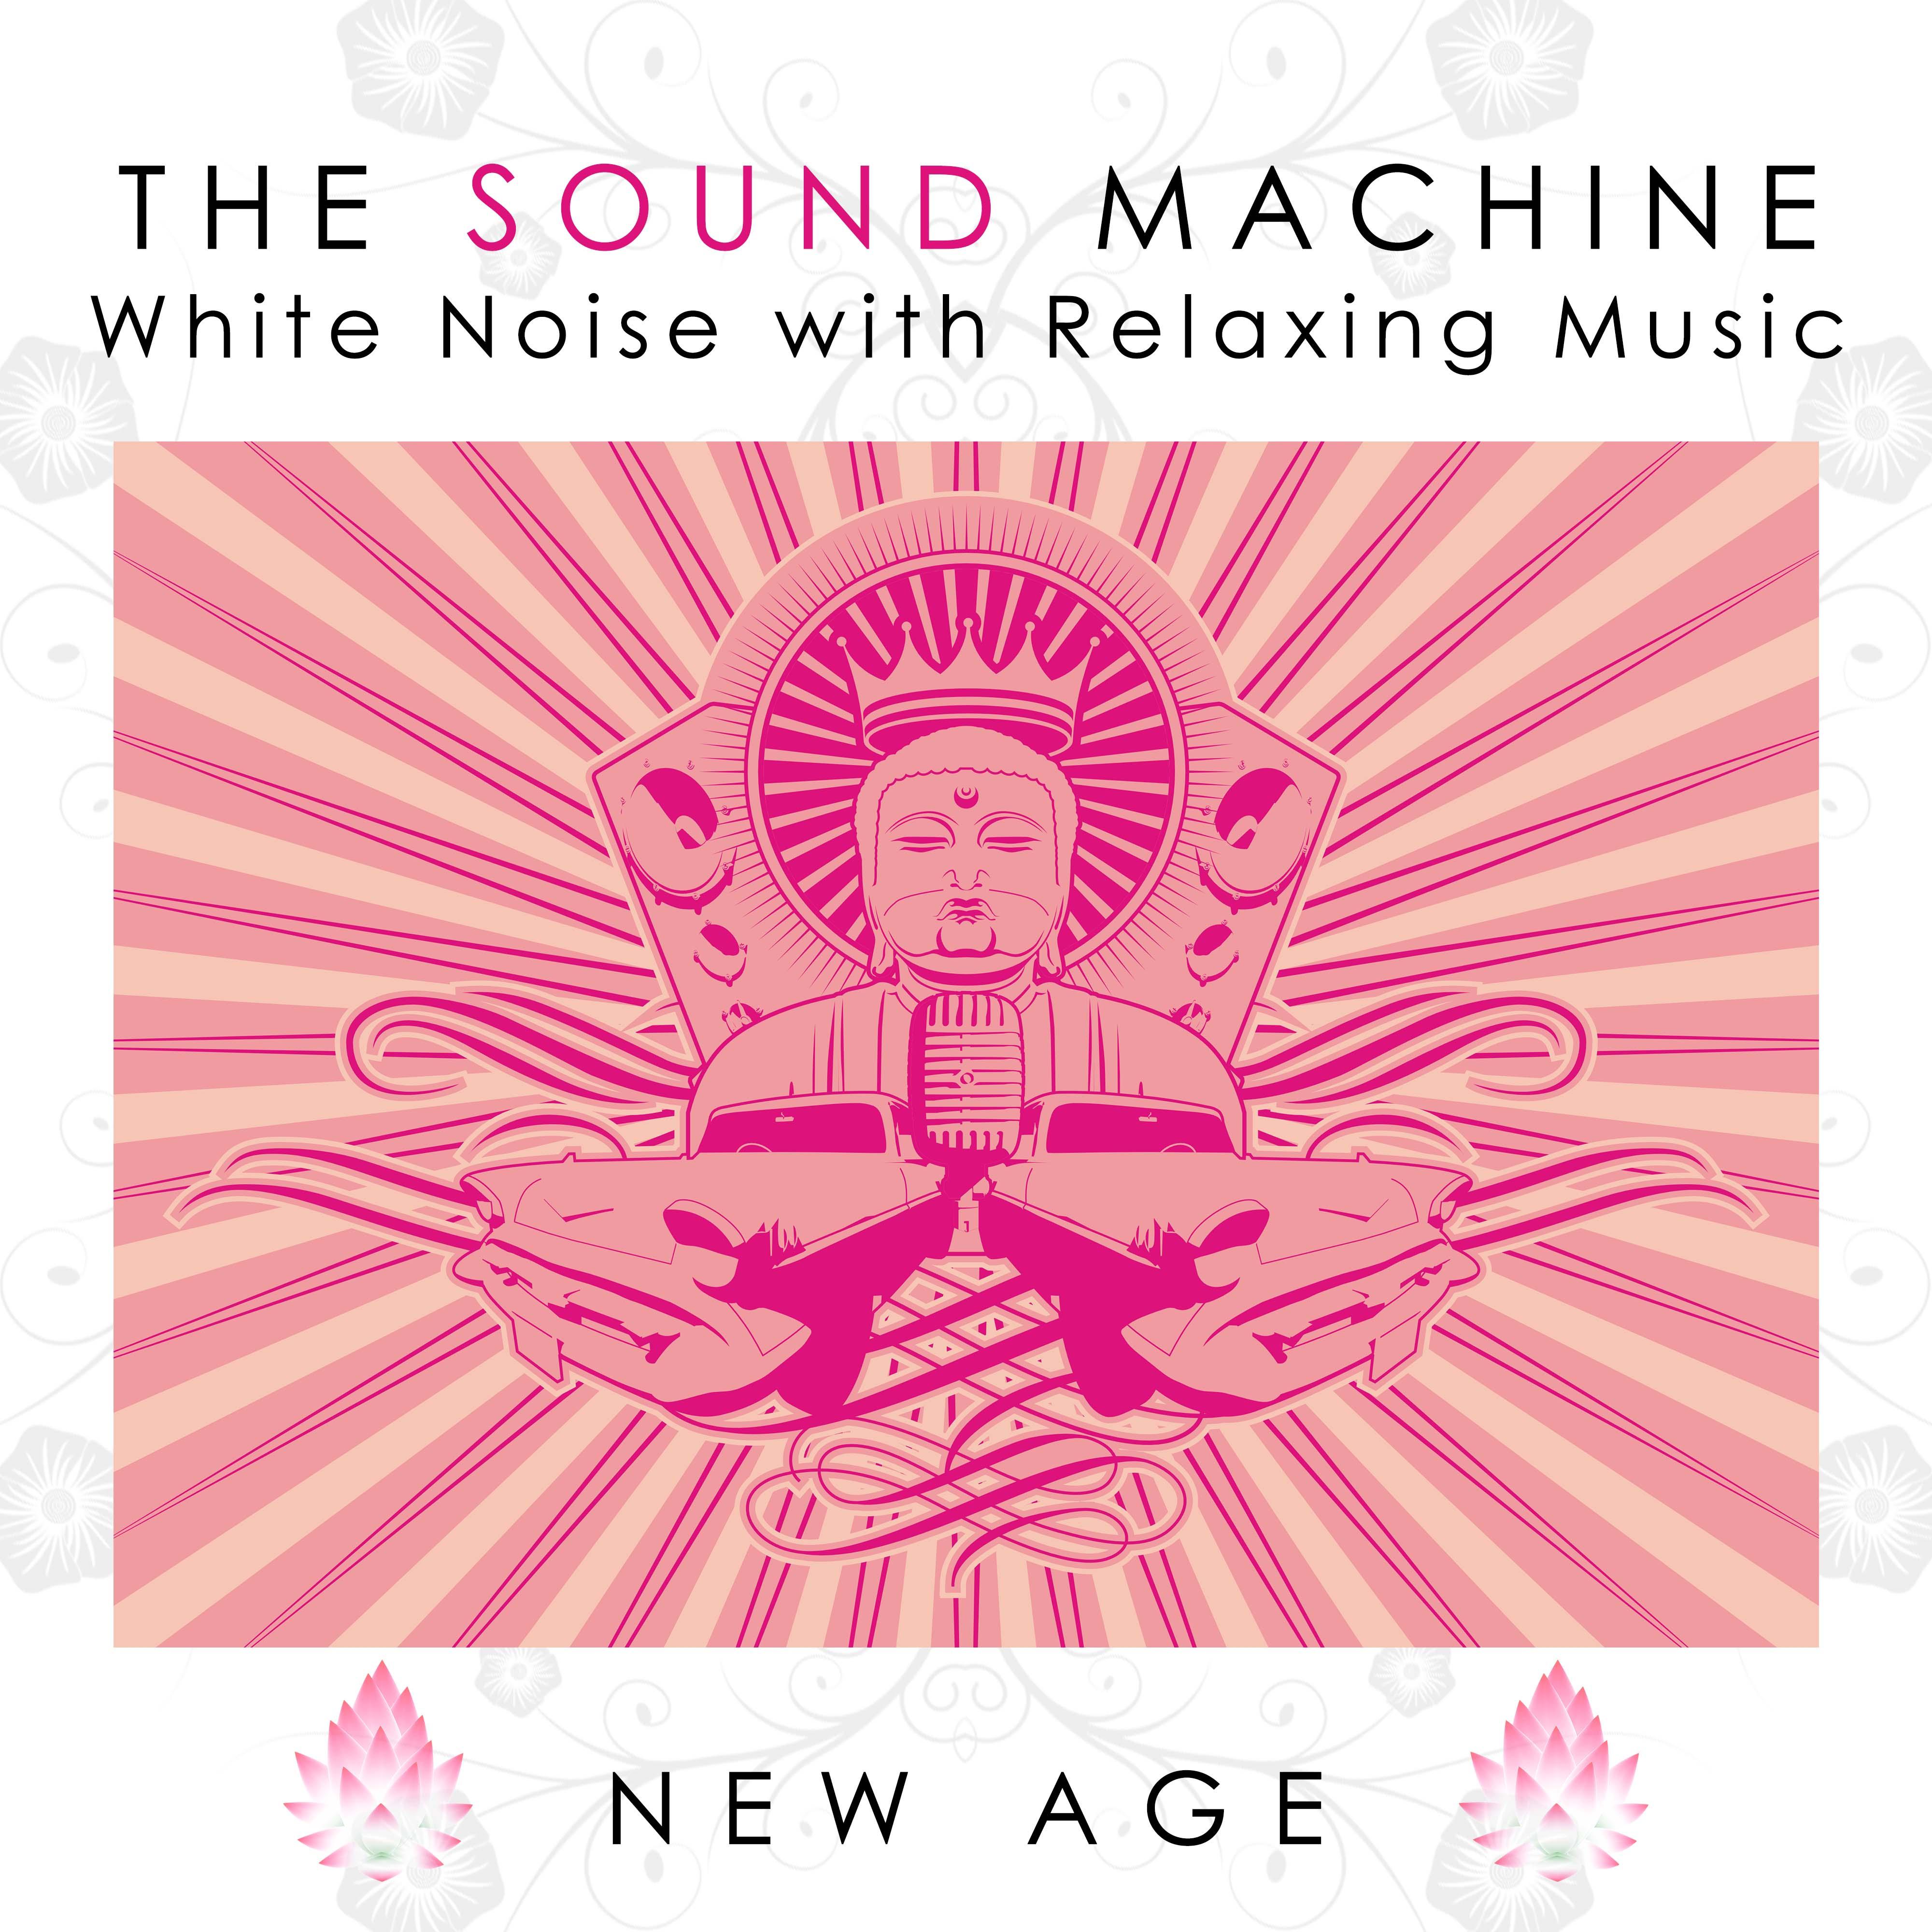 The Sound Machine: White Noise with Relaxing Music